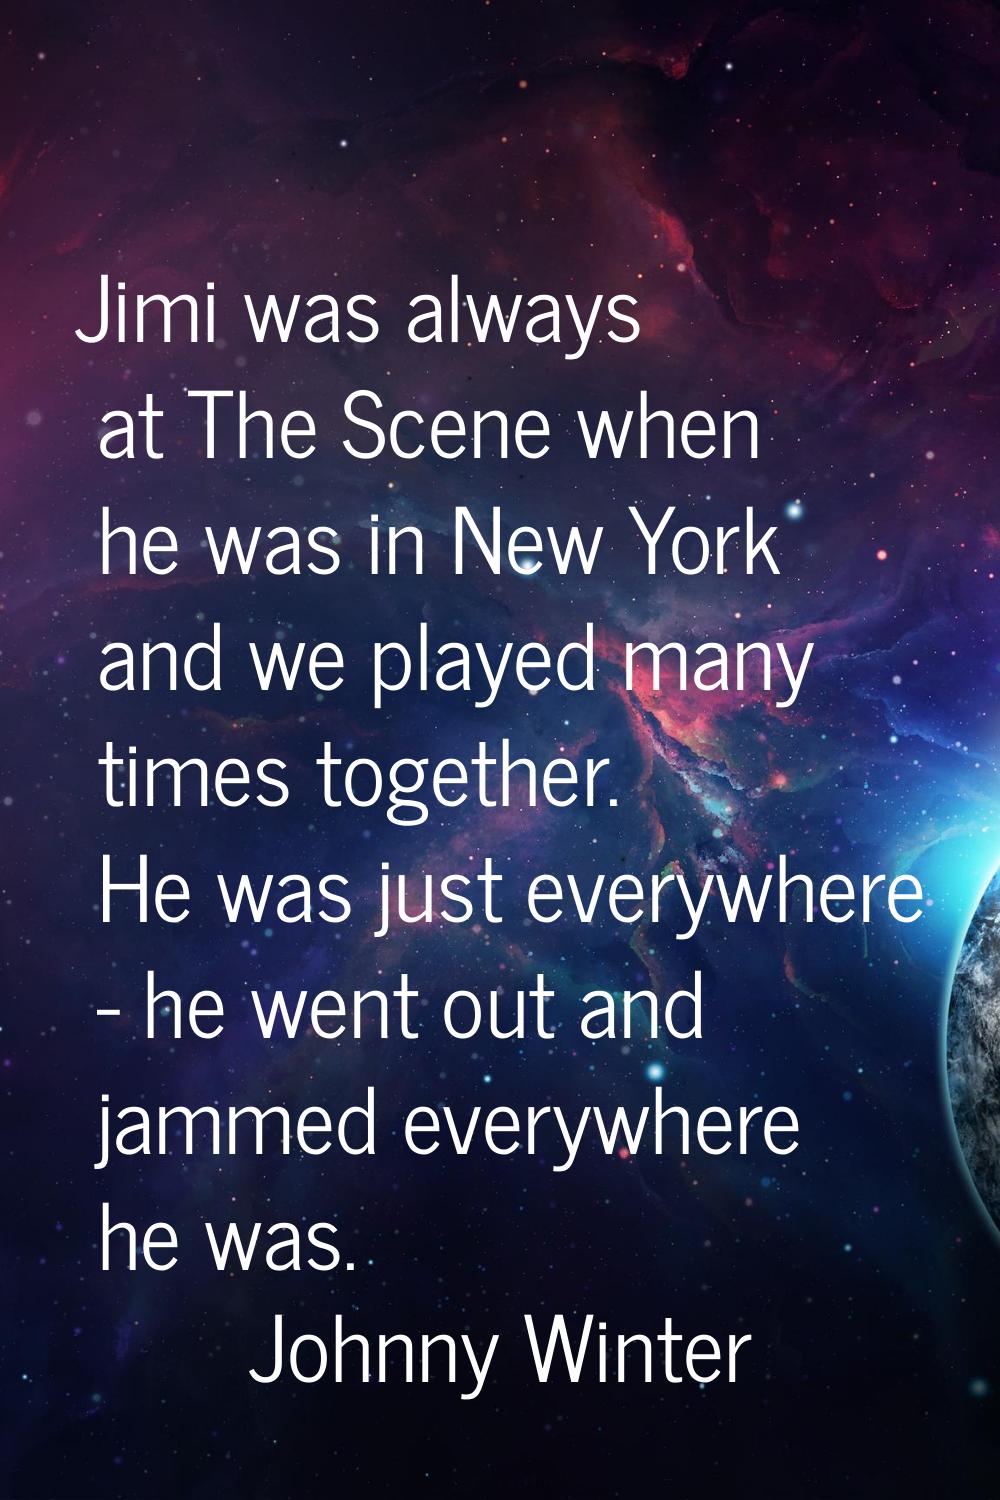 Jimi was always at The Scene when he was in New York and we played many times together. He was just